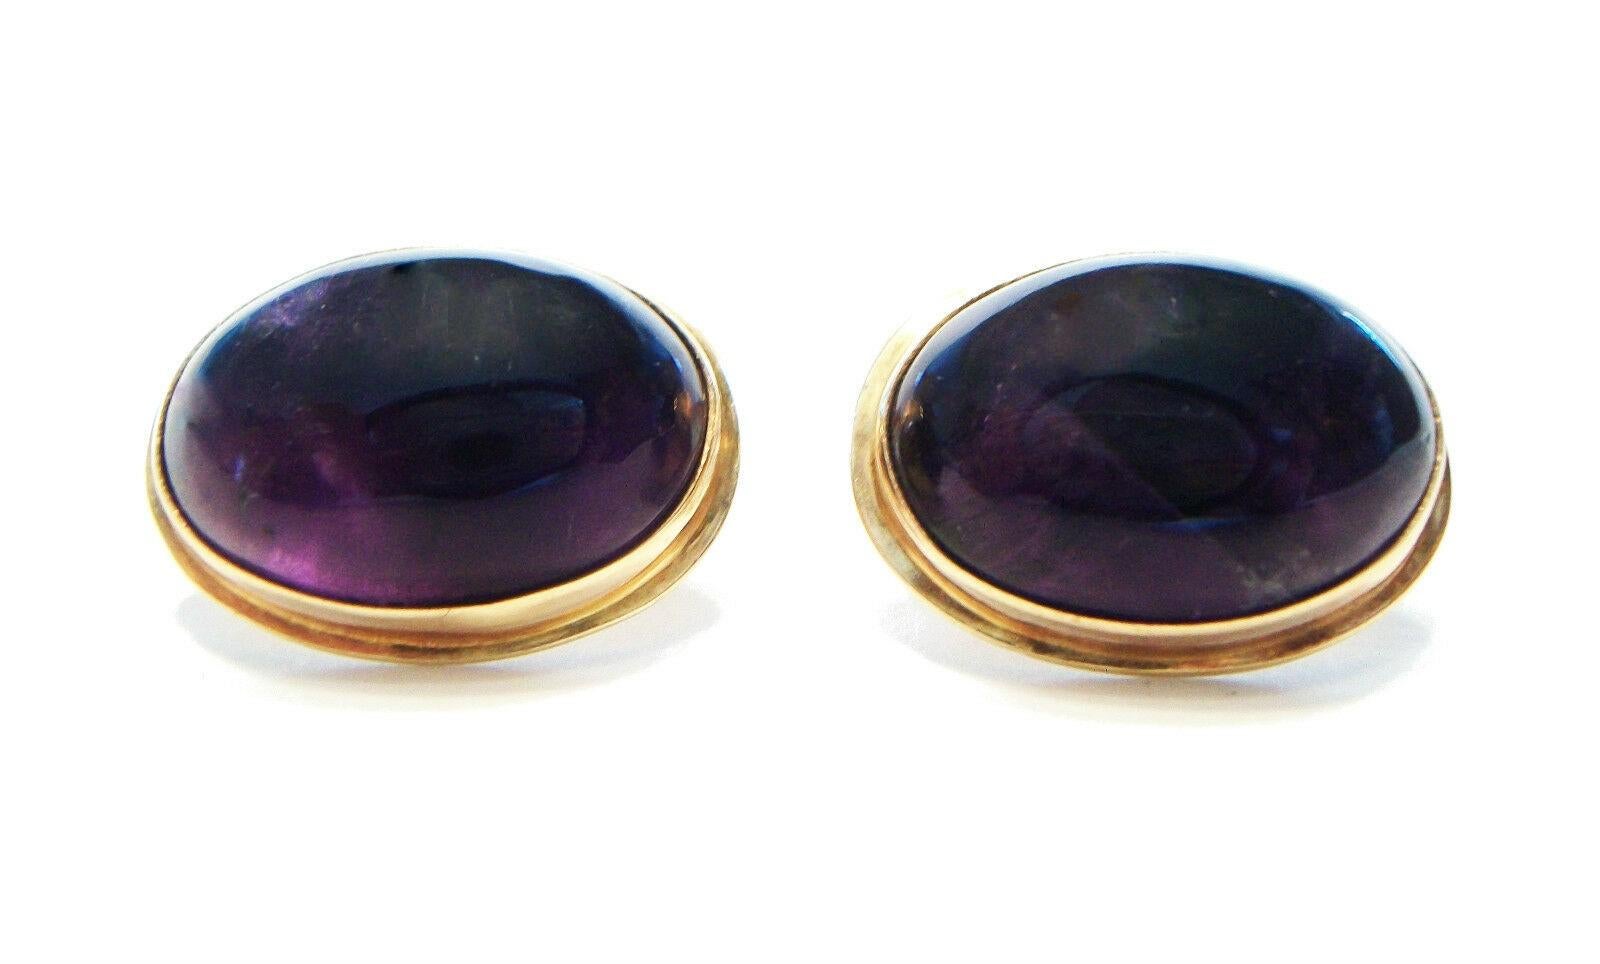 Vintage oval cabochon Amethyst (each approx. 12.4 carats - 18 mm. x 12 mm. x 7 mm. deep) & 14K yellow gold cufflinks - bezel set gemstones - bench made/hand made - unsigned - each toggle stamped 14K - late 20th century.

Excellent vintage condition